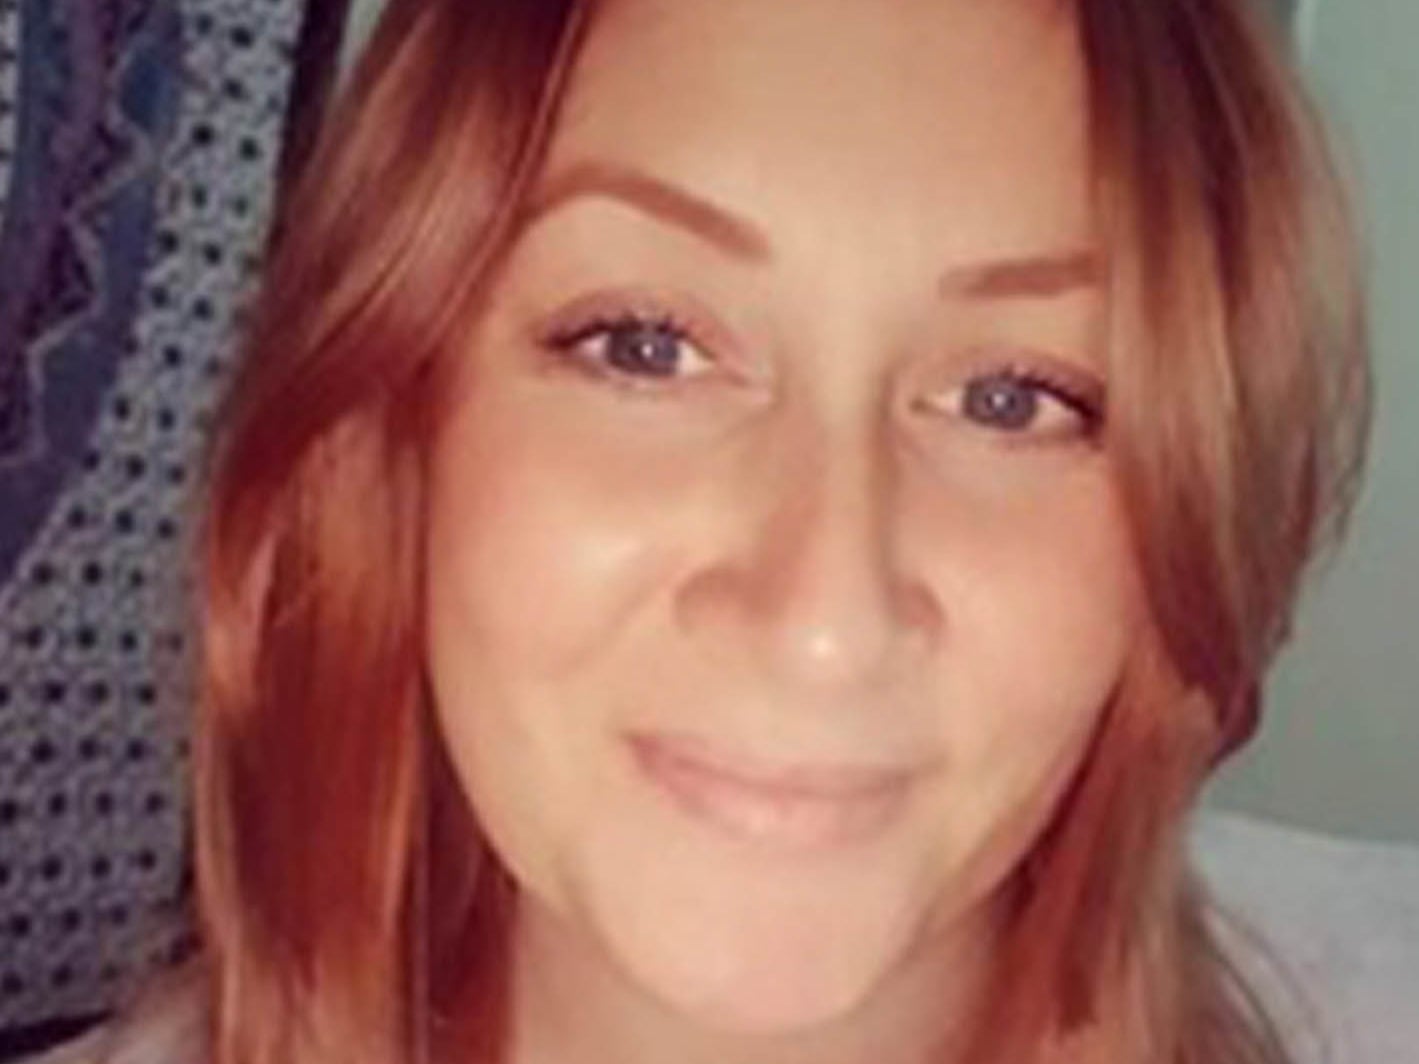 Police have found a body believed to be that of missing mother-of-two Katie Kenyon after receiving new information